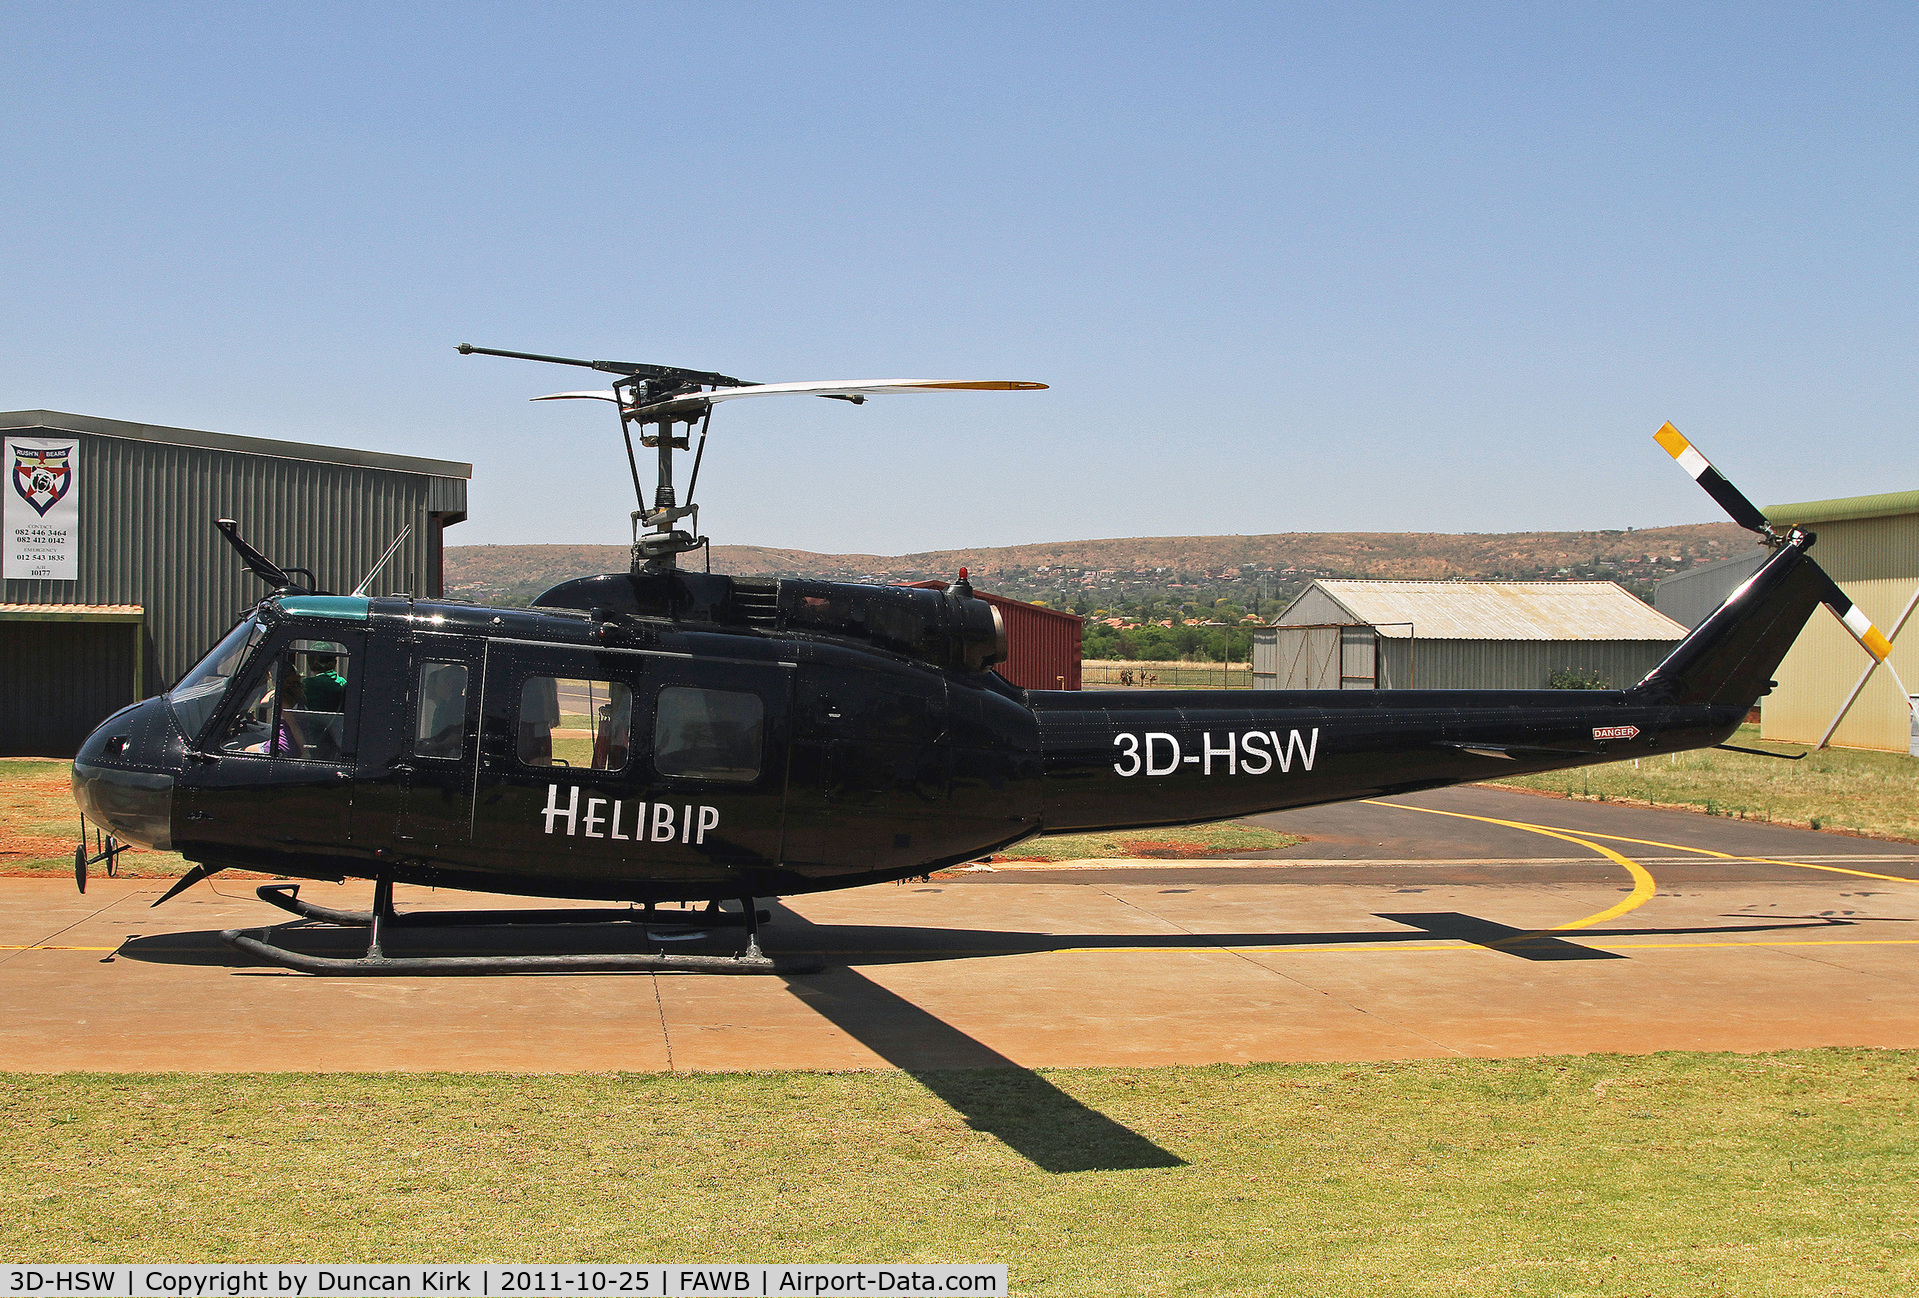 3D-HSW, Bell 205 C/N Not found 3D-HSW, Taking off for Swaziland